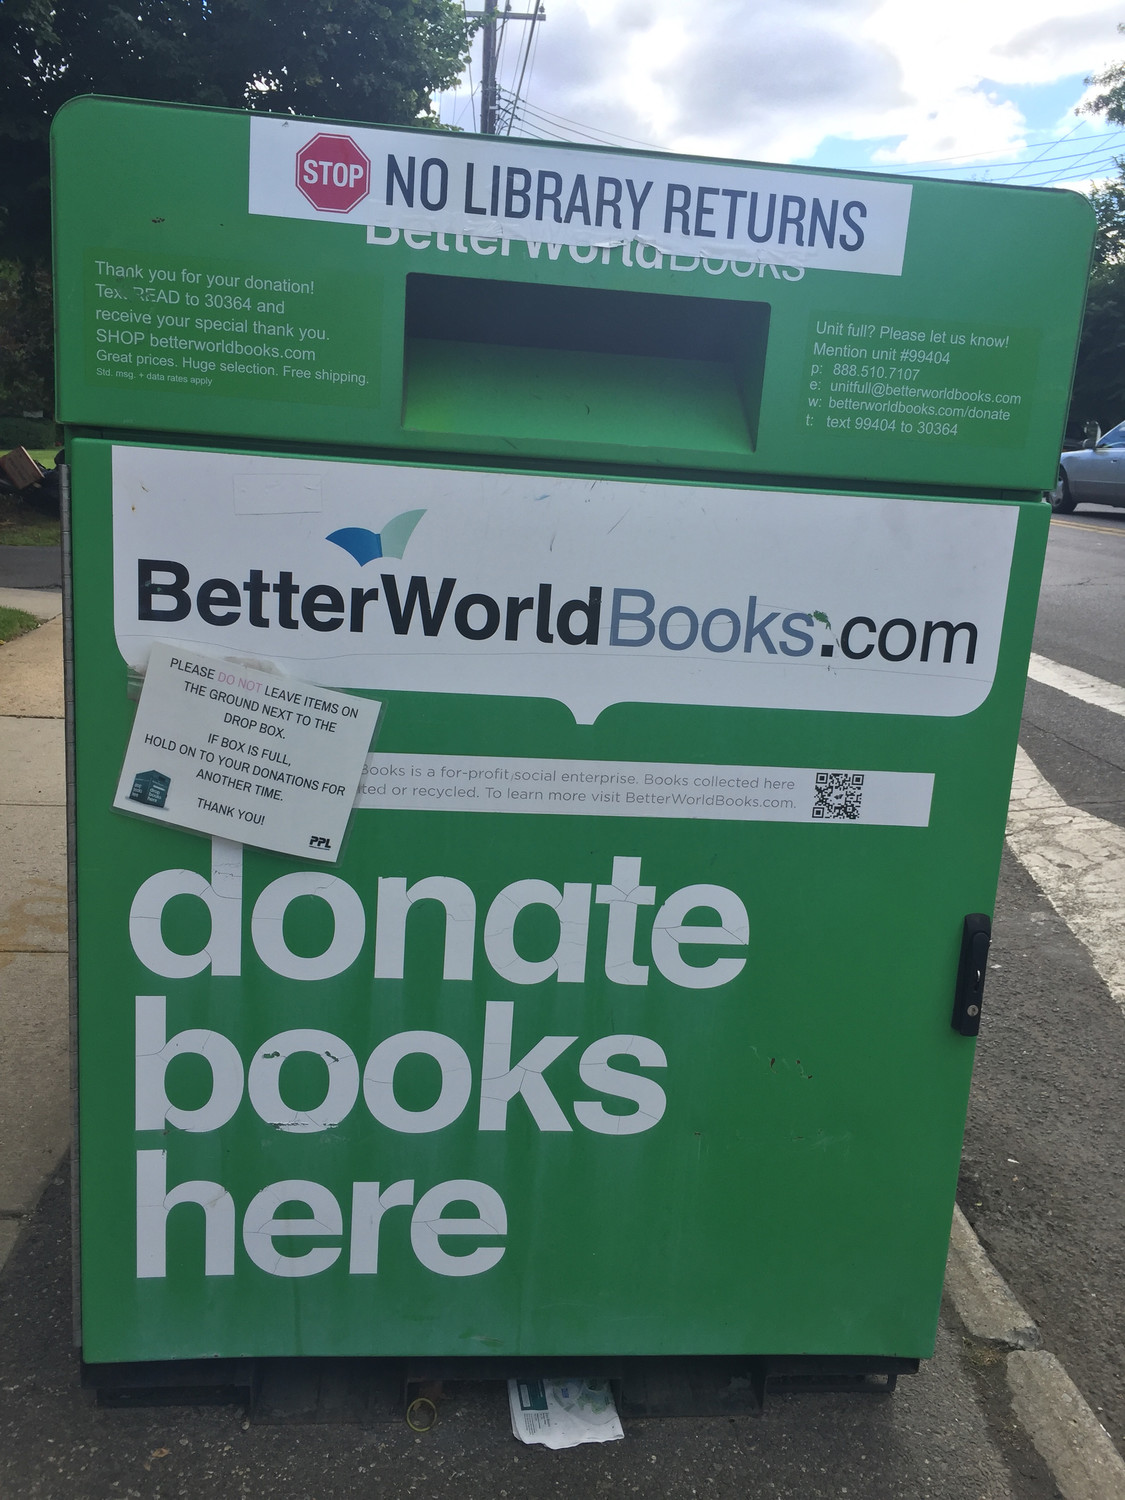 Better World Books has been collecting used and new books for sale or donation since 2002.